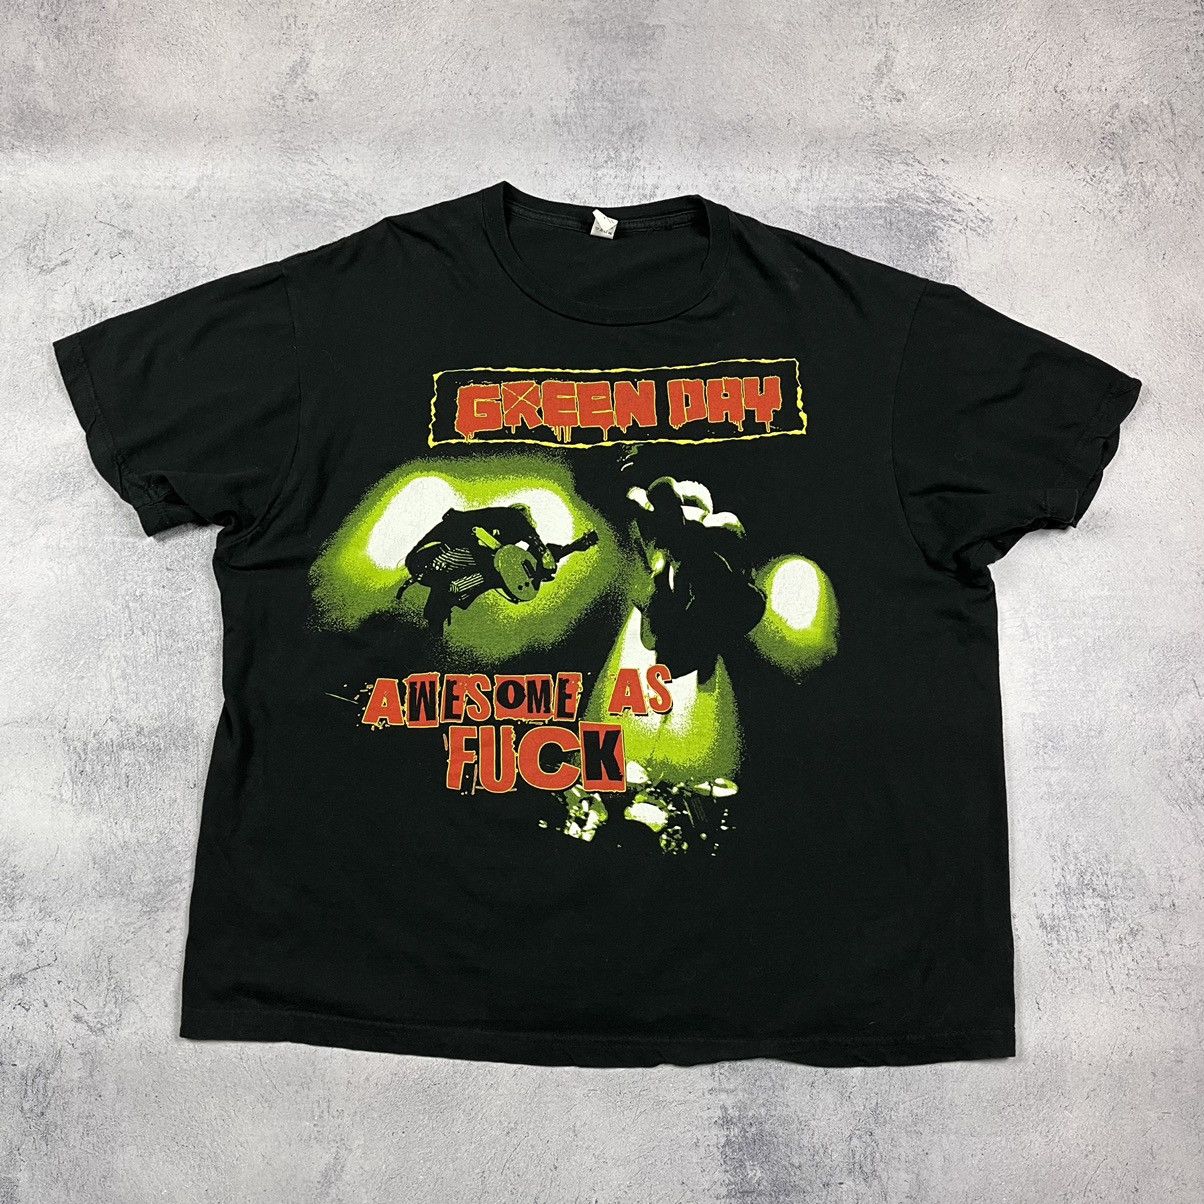 Vintage Vintage Green Day awesome as fuck rock band tee 90’s Size US L / EU 52-54 / 3 - 2 Preview